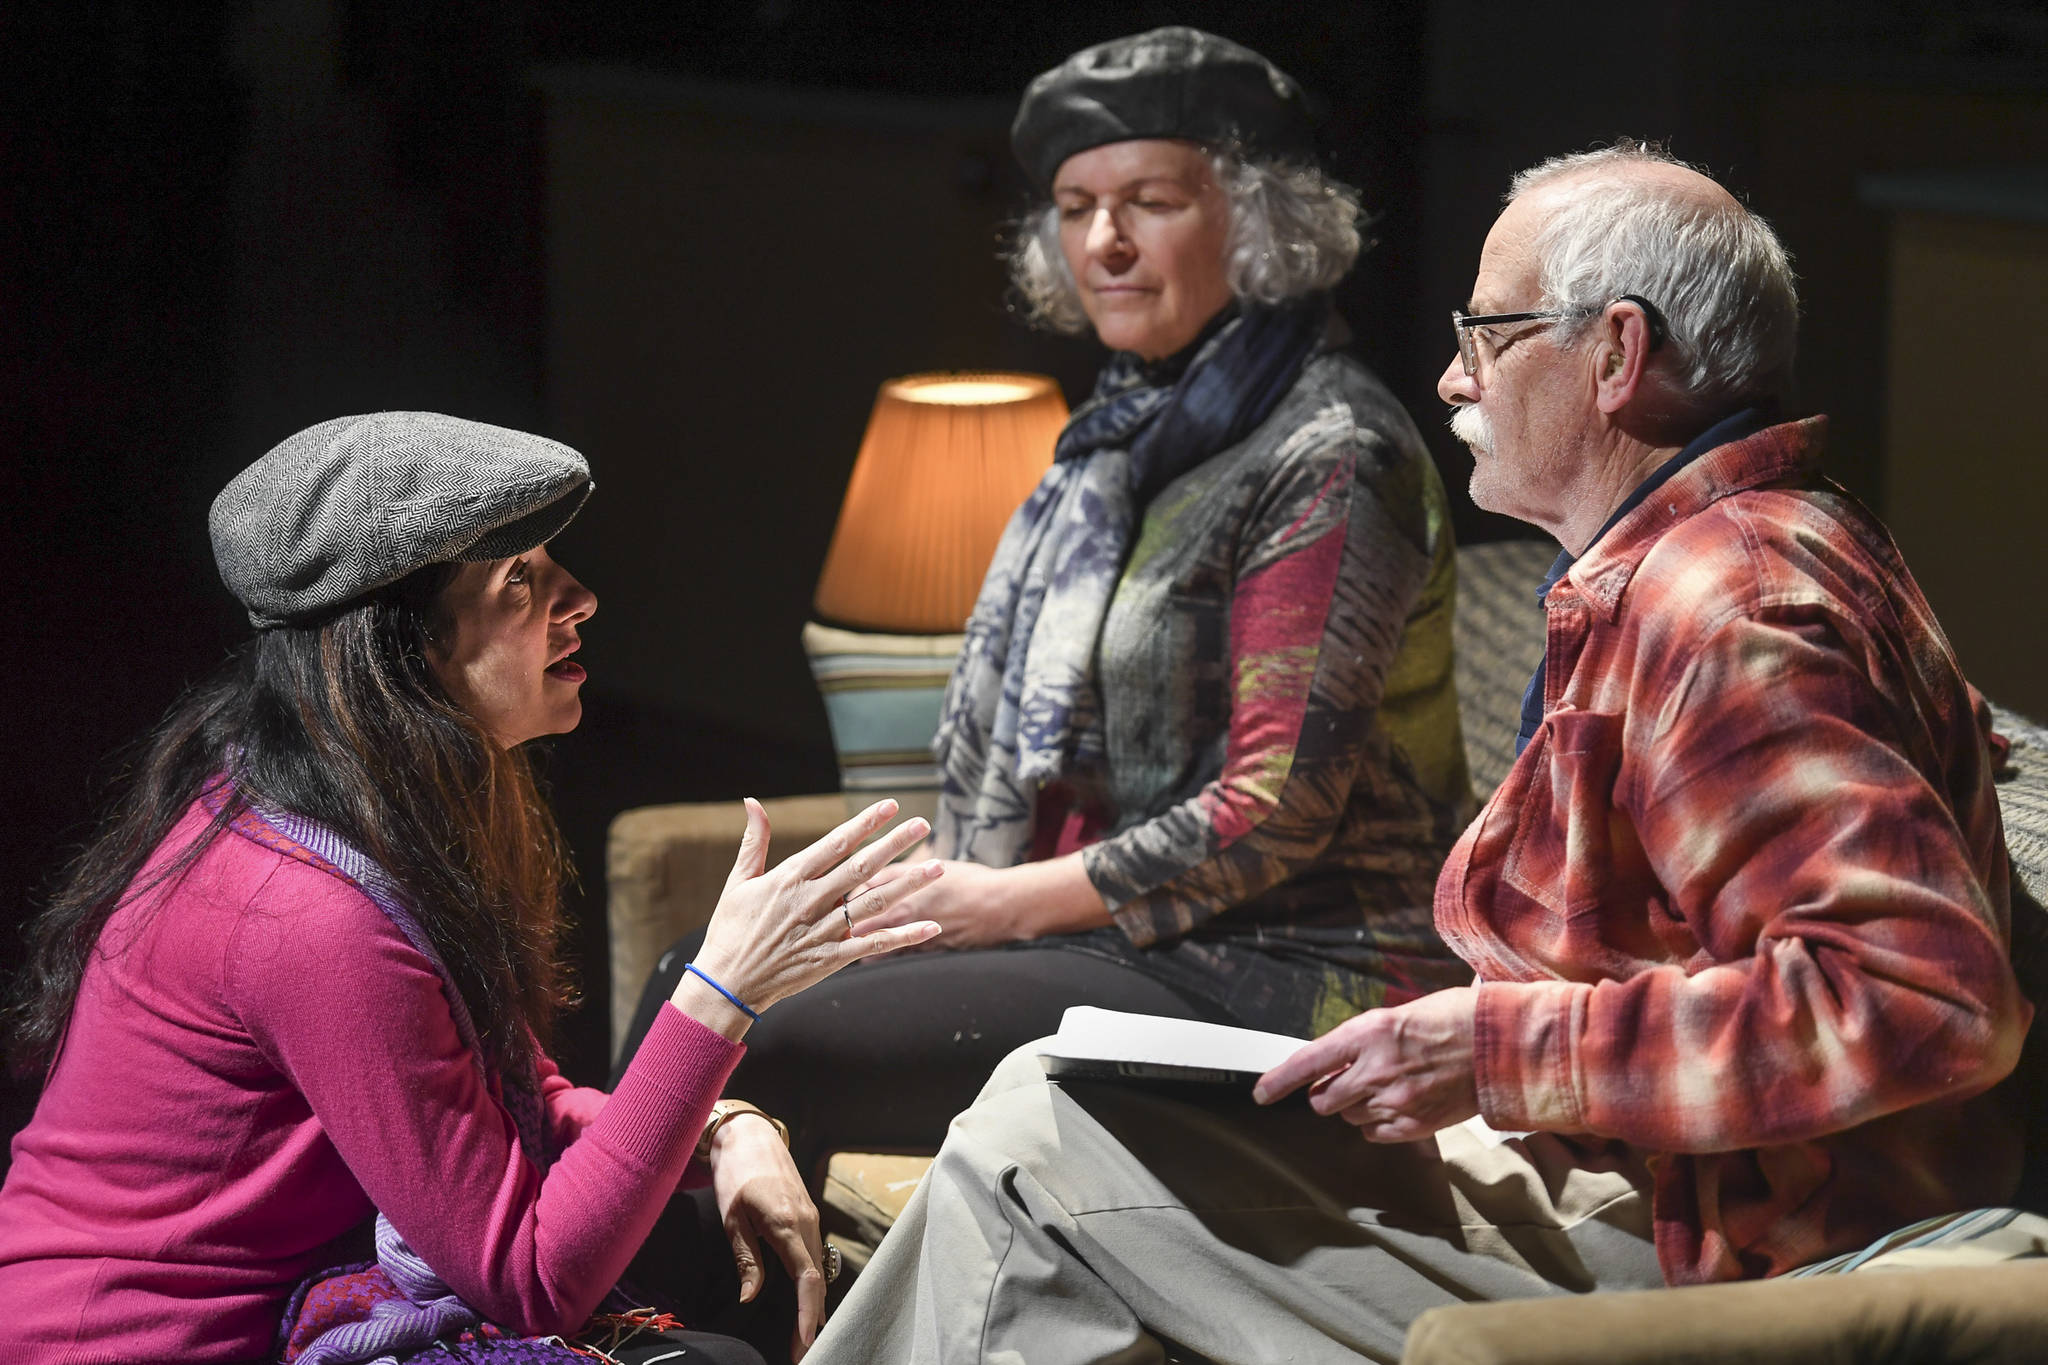 Underneath dark premise, ‘With’ is an incredibly sweet, funny play